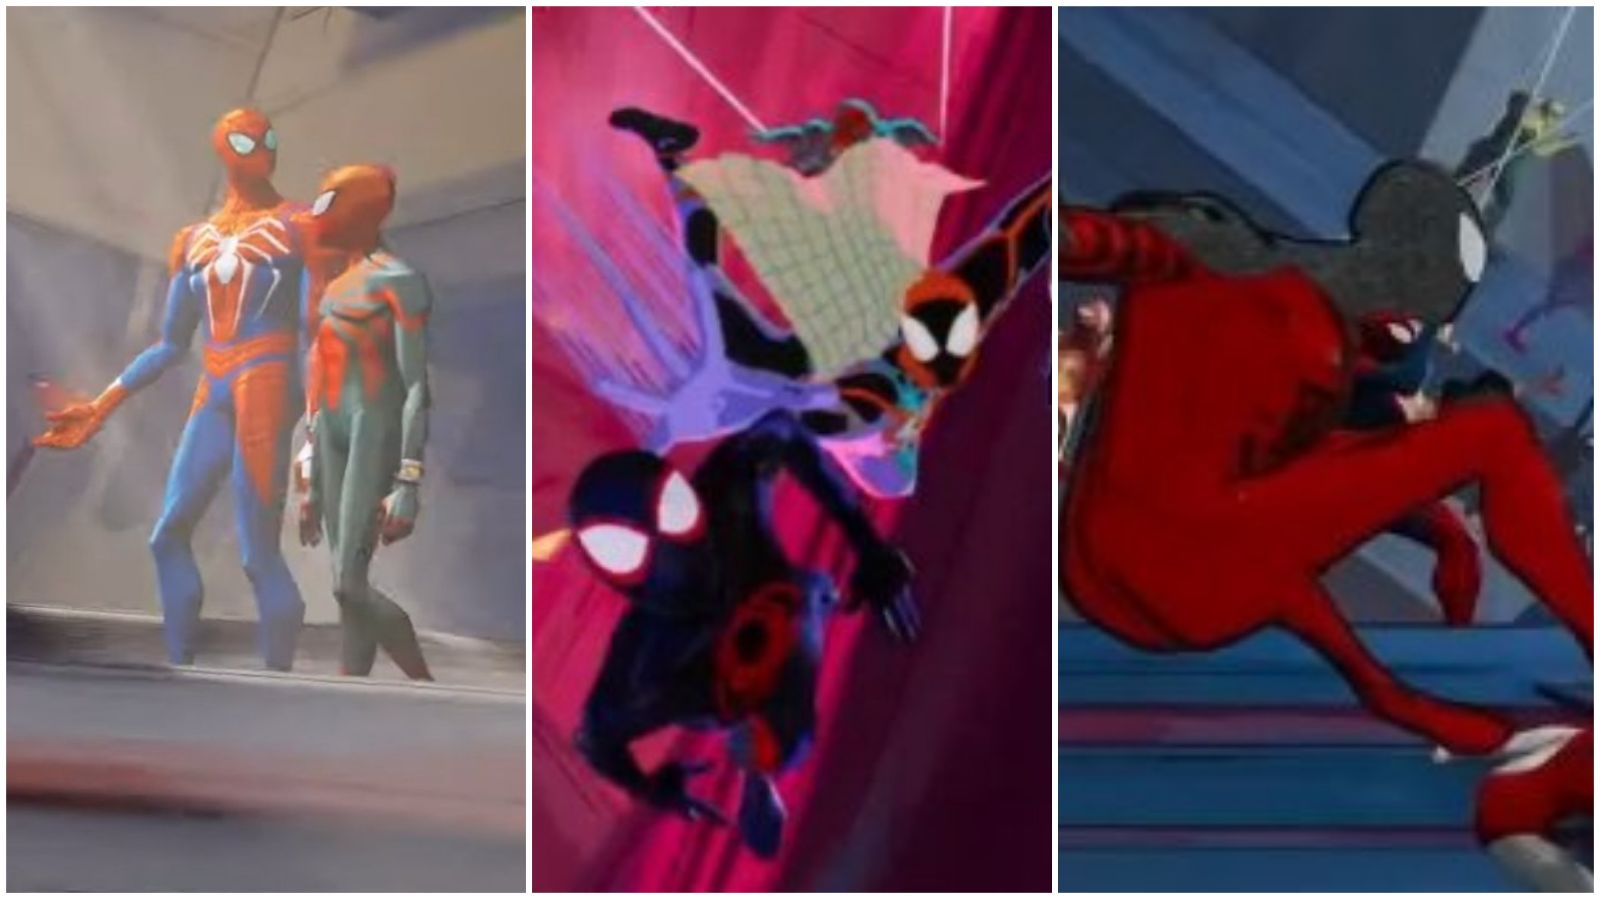 Every Spider-Man cameo and Easter egg in Across the Spider-Verse